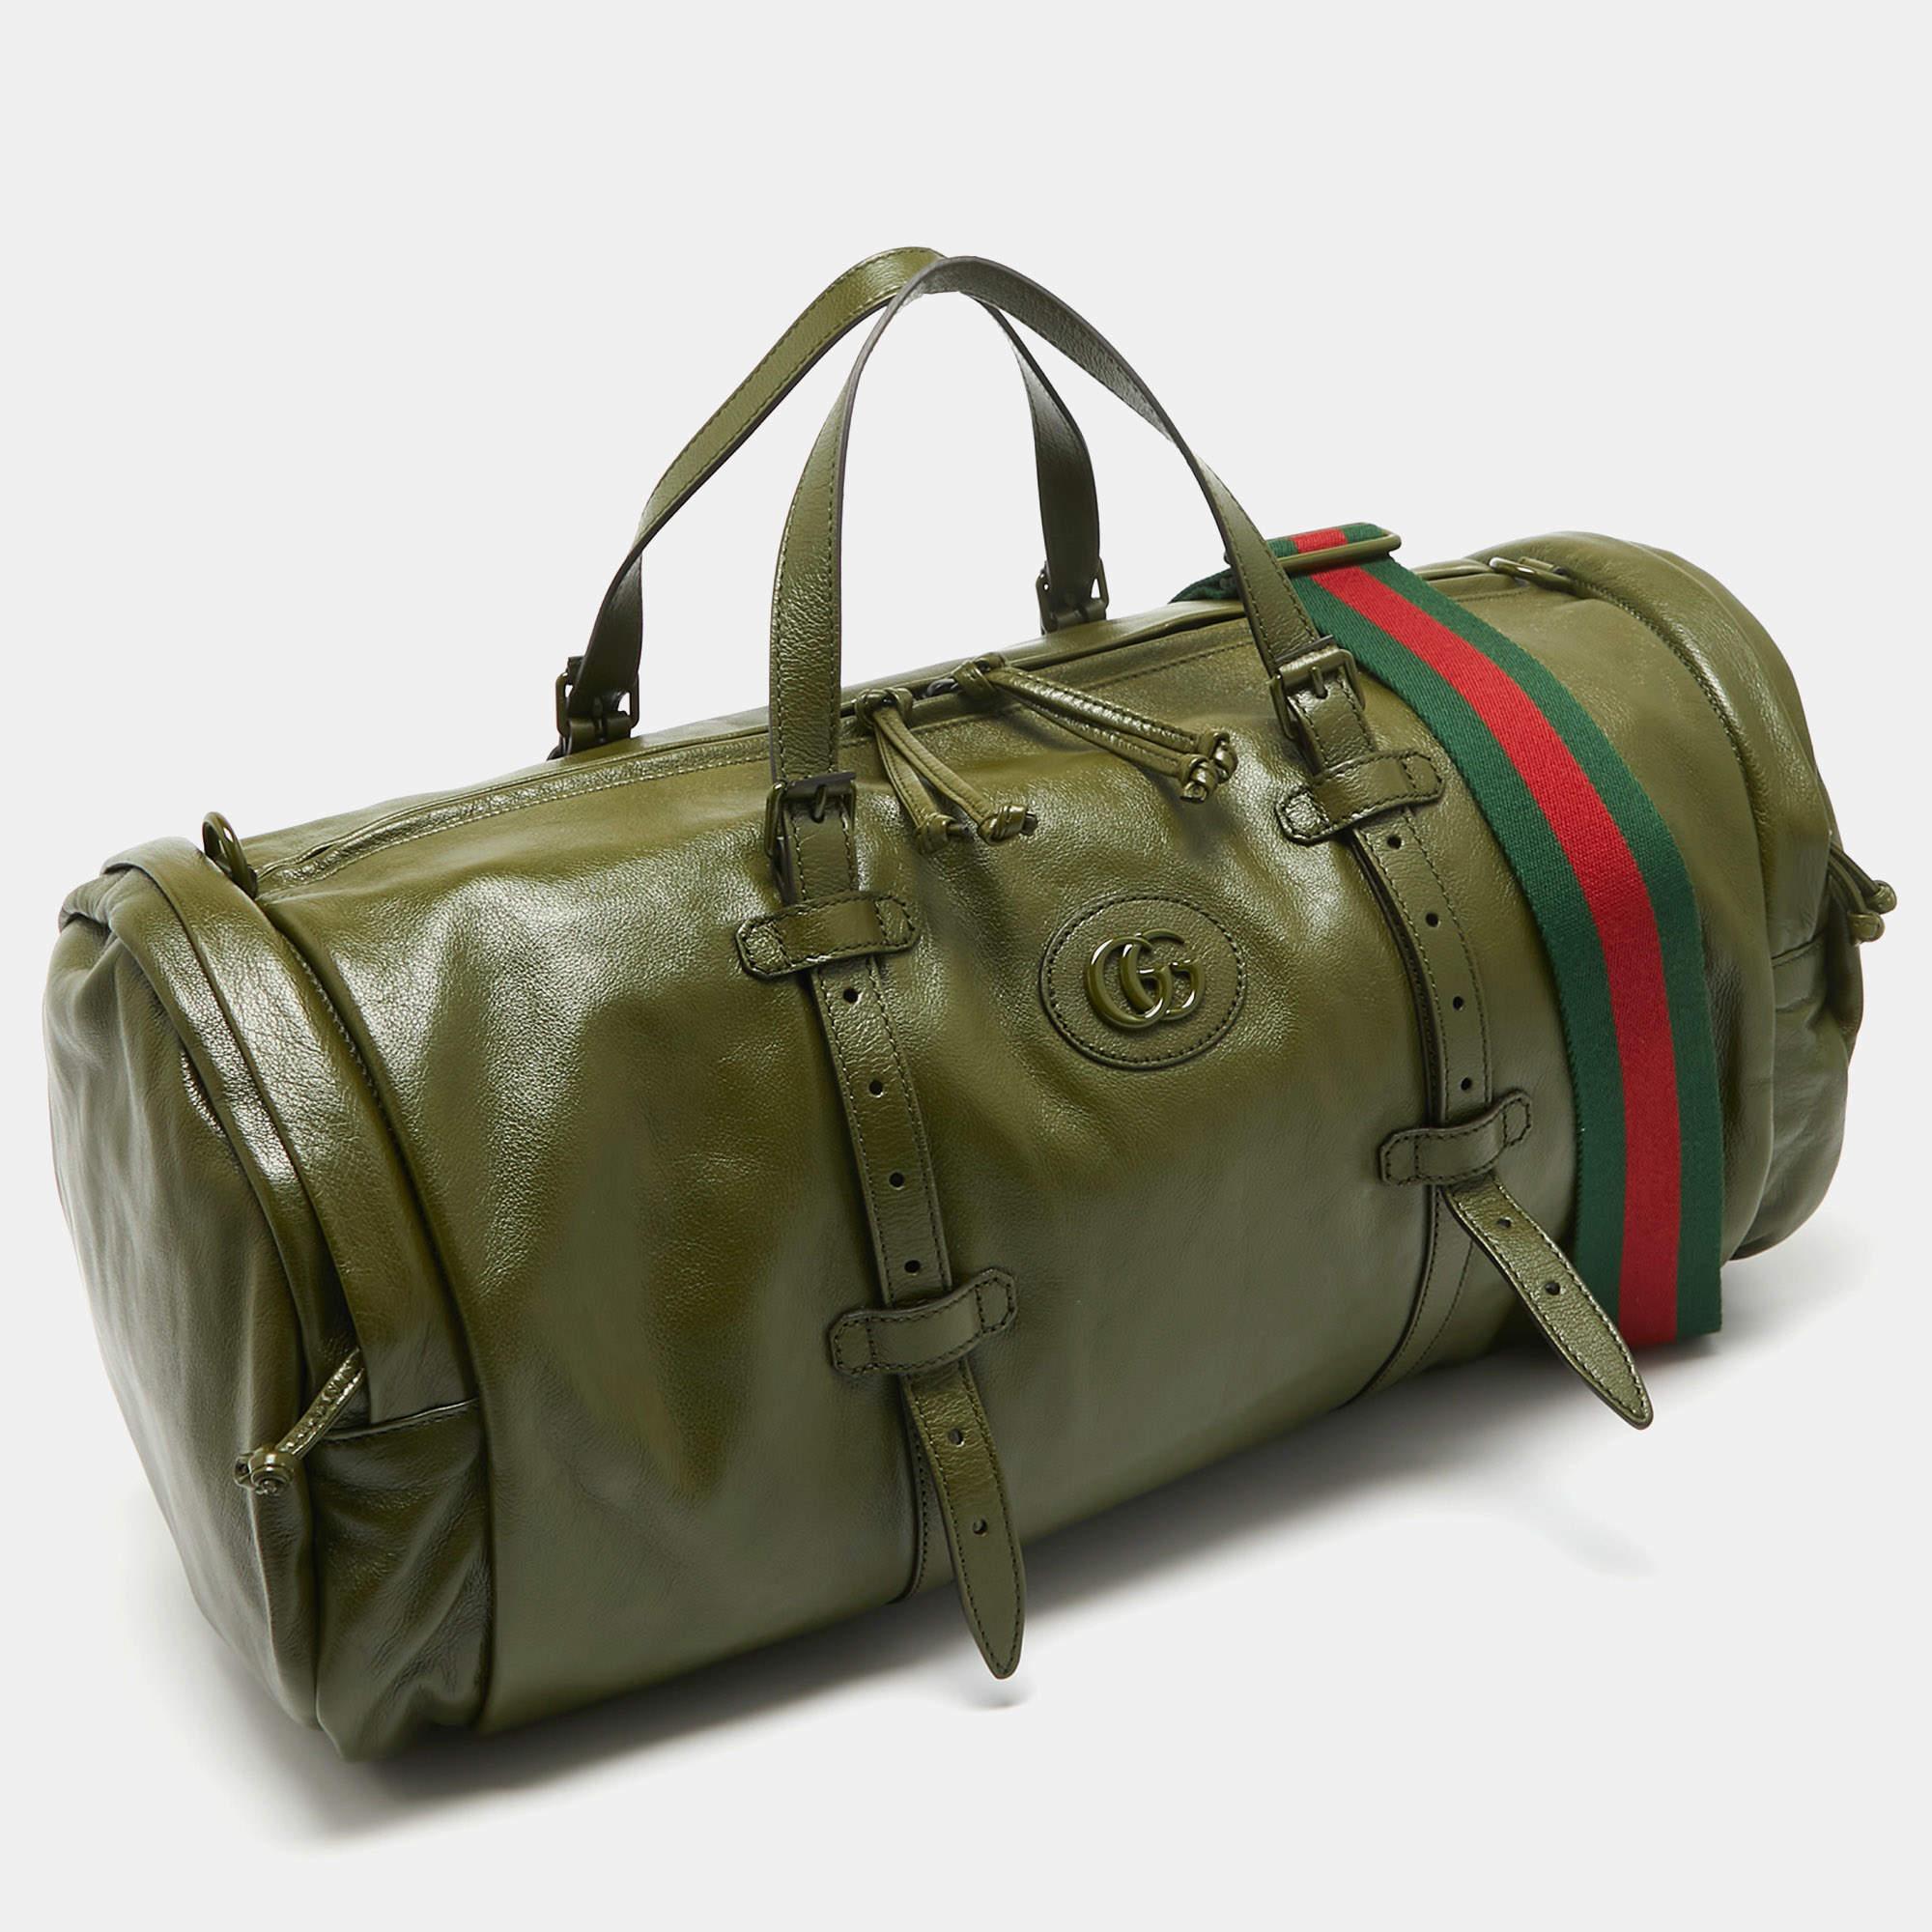 Gucci Green Leather Large Tonal Double G Duffle Bag In New Condition For Sale In Dubai, Al Qouz 2